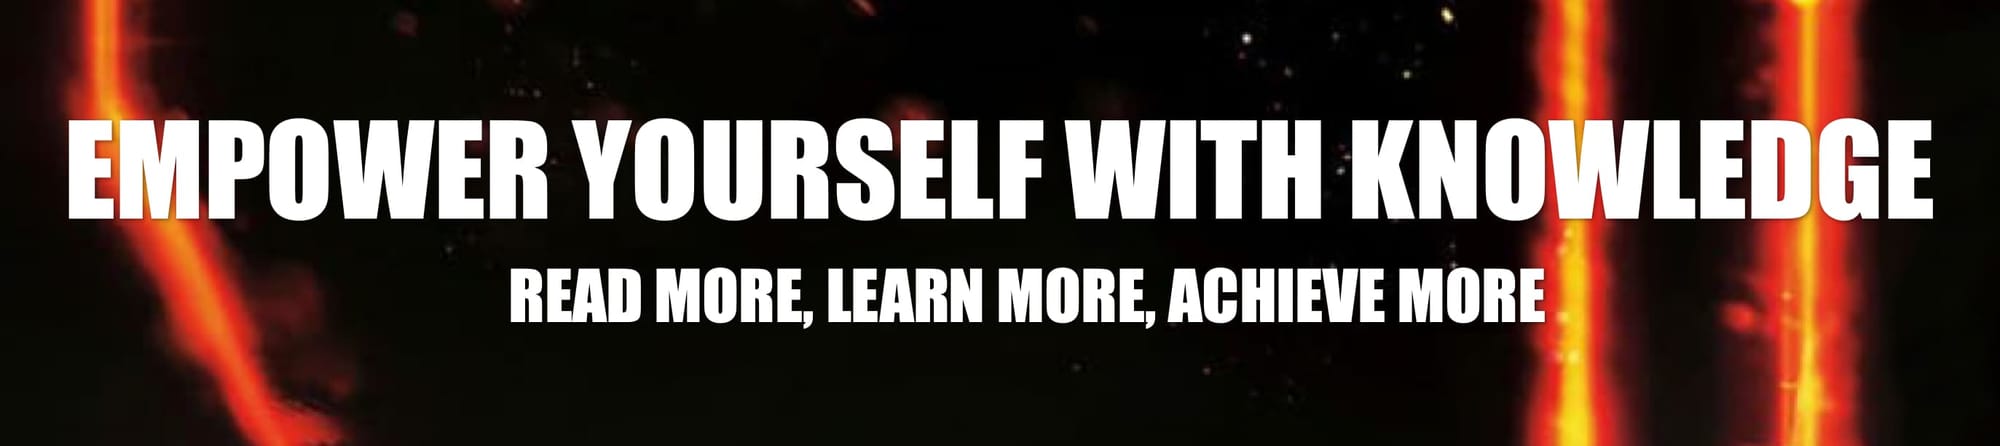 EMPOWER YOURSELF WITH KNOWLEDGE - HEADER